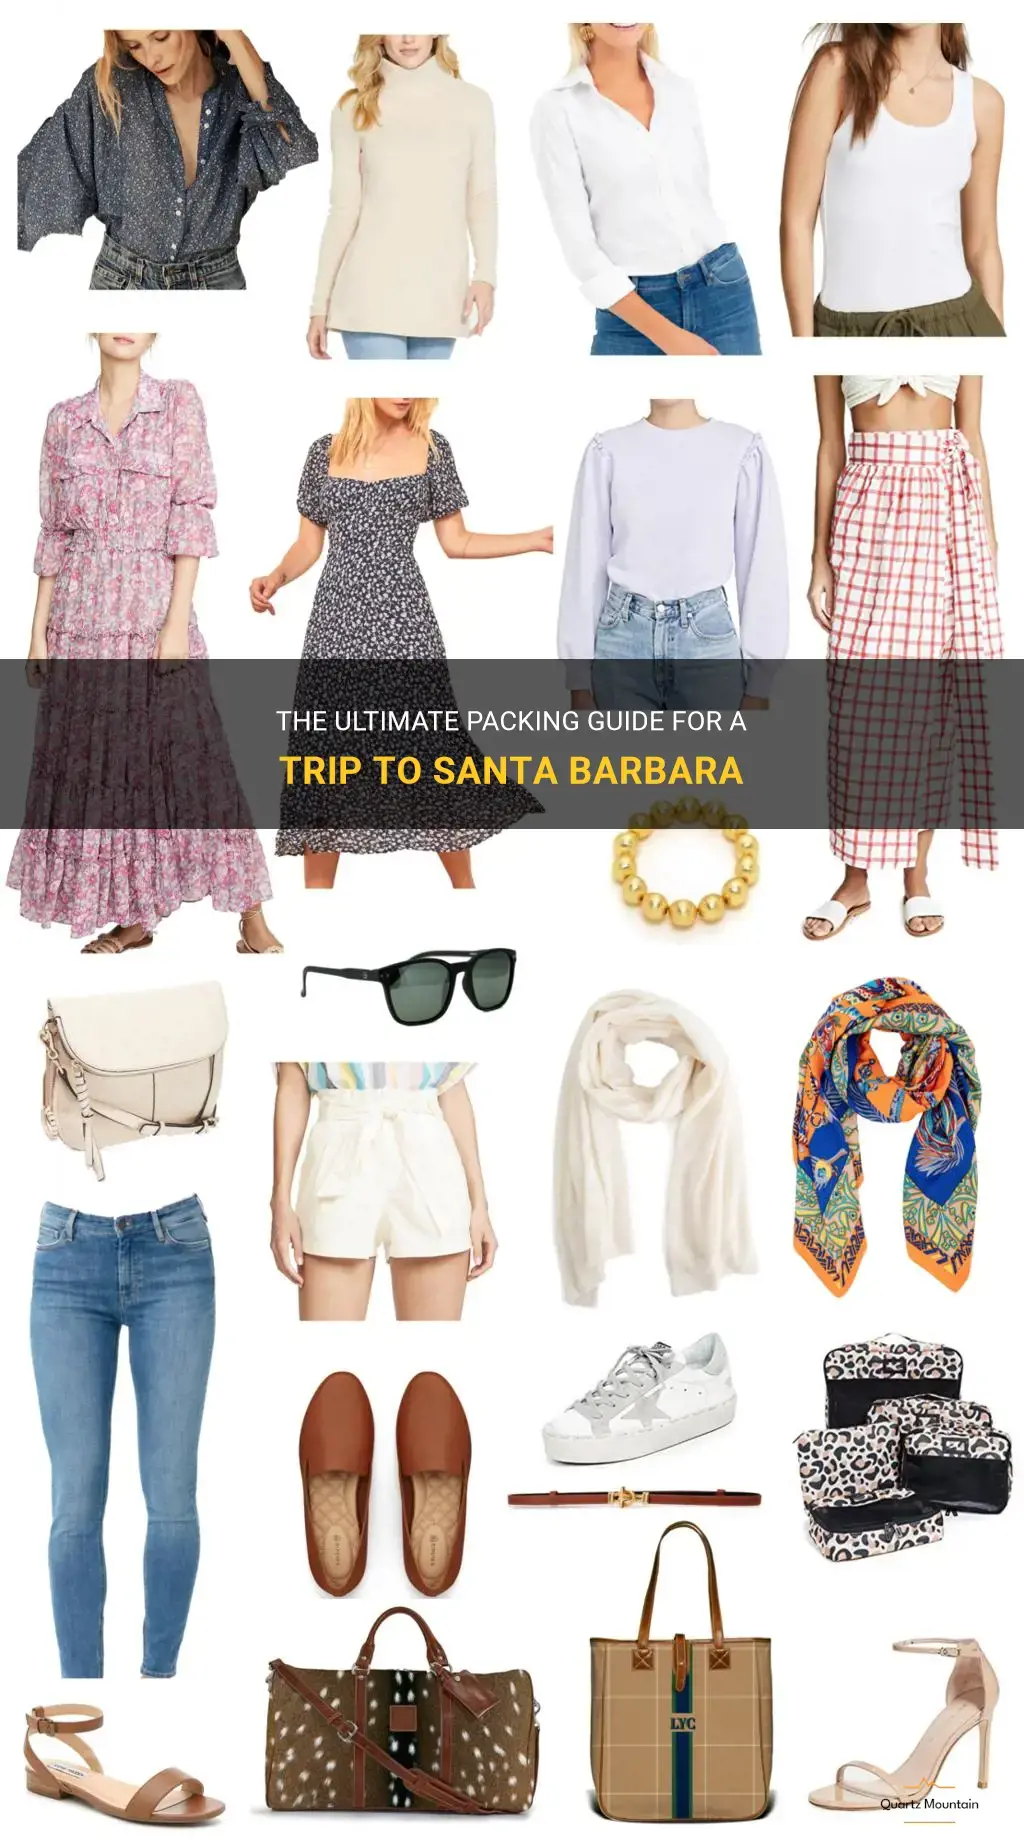 The Ultimate Packing Guide For A Trip To Santa Barbara | QuartzMountain